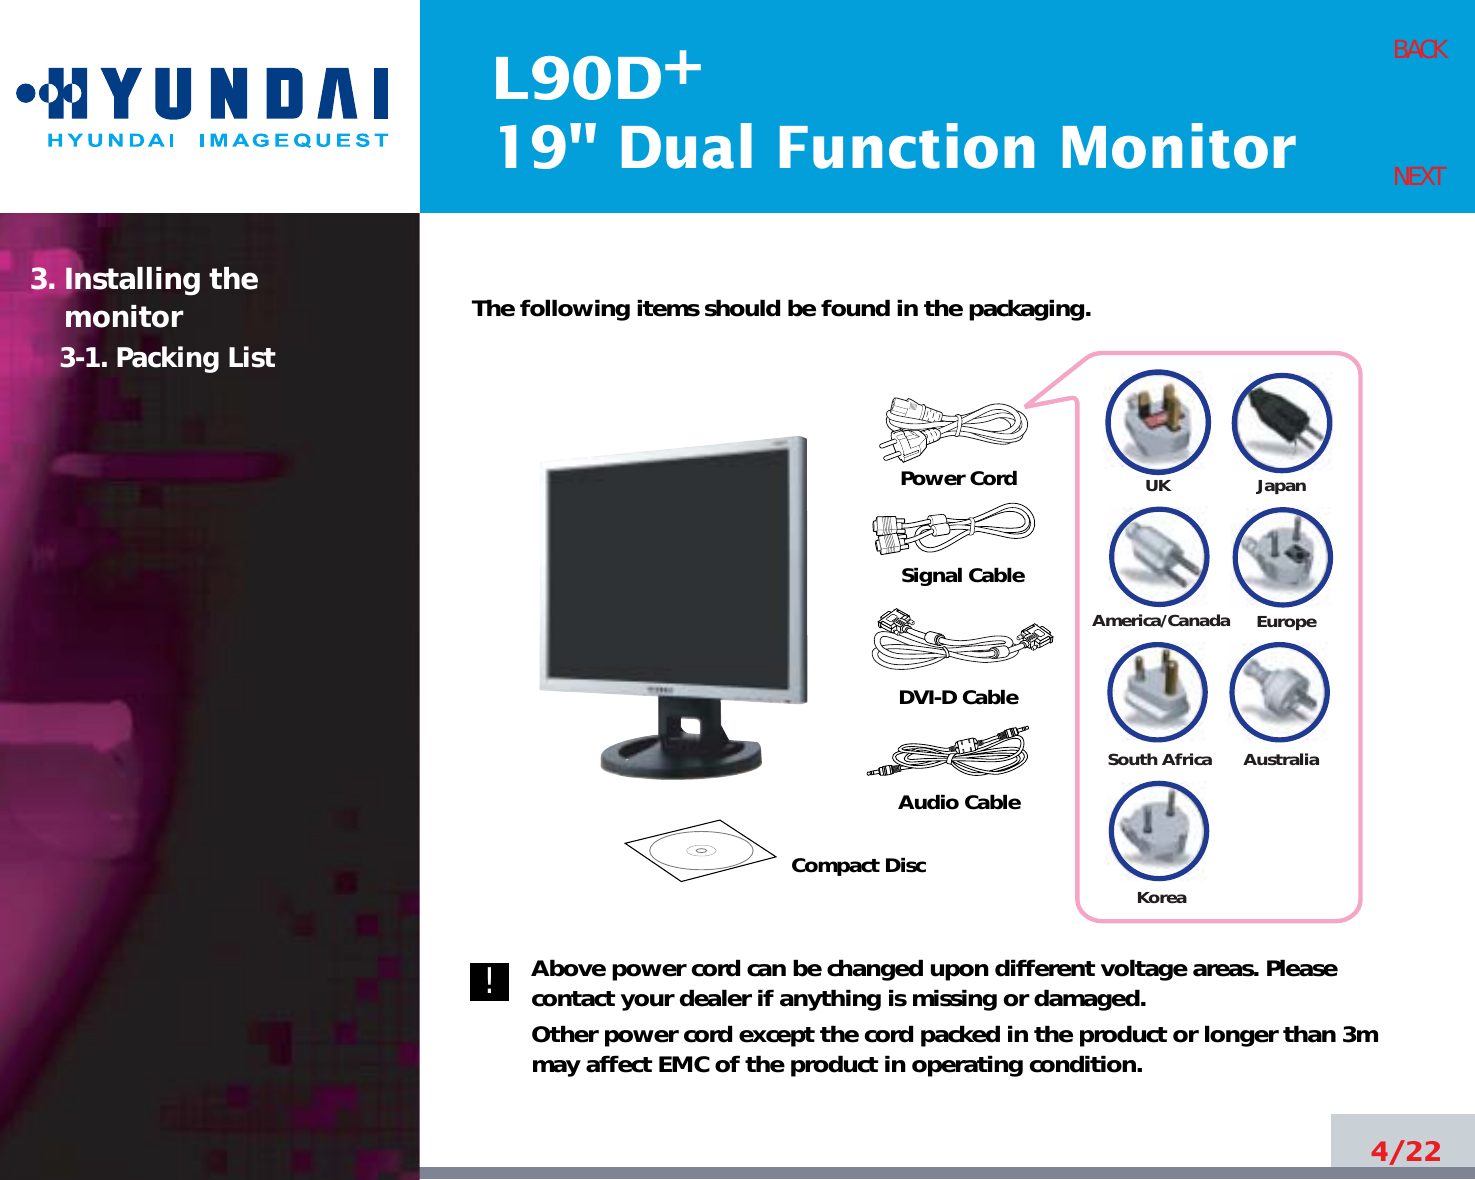 L90D19&quot; Dual Function Monitor+4/22BACKNEXTThe following items should be found in the packaging.Above power cord can be changed upon different voltage areas. Pleasecontact your dealer if anything is missing or damaged.Other power cord except the cord packed in the product or longer than 3mmay affect EMC of the product in operating condition.3. Installing the monitor3-1. Packing List!UKAmerica/CanadaJapanAustraliaKoreaEuropeSouth AfricaPower CordSignal CableDVI-D CableCompact DiscAudio Cable 